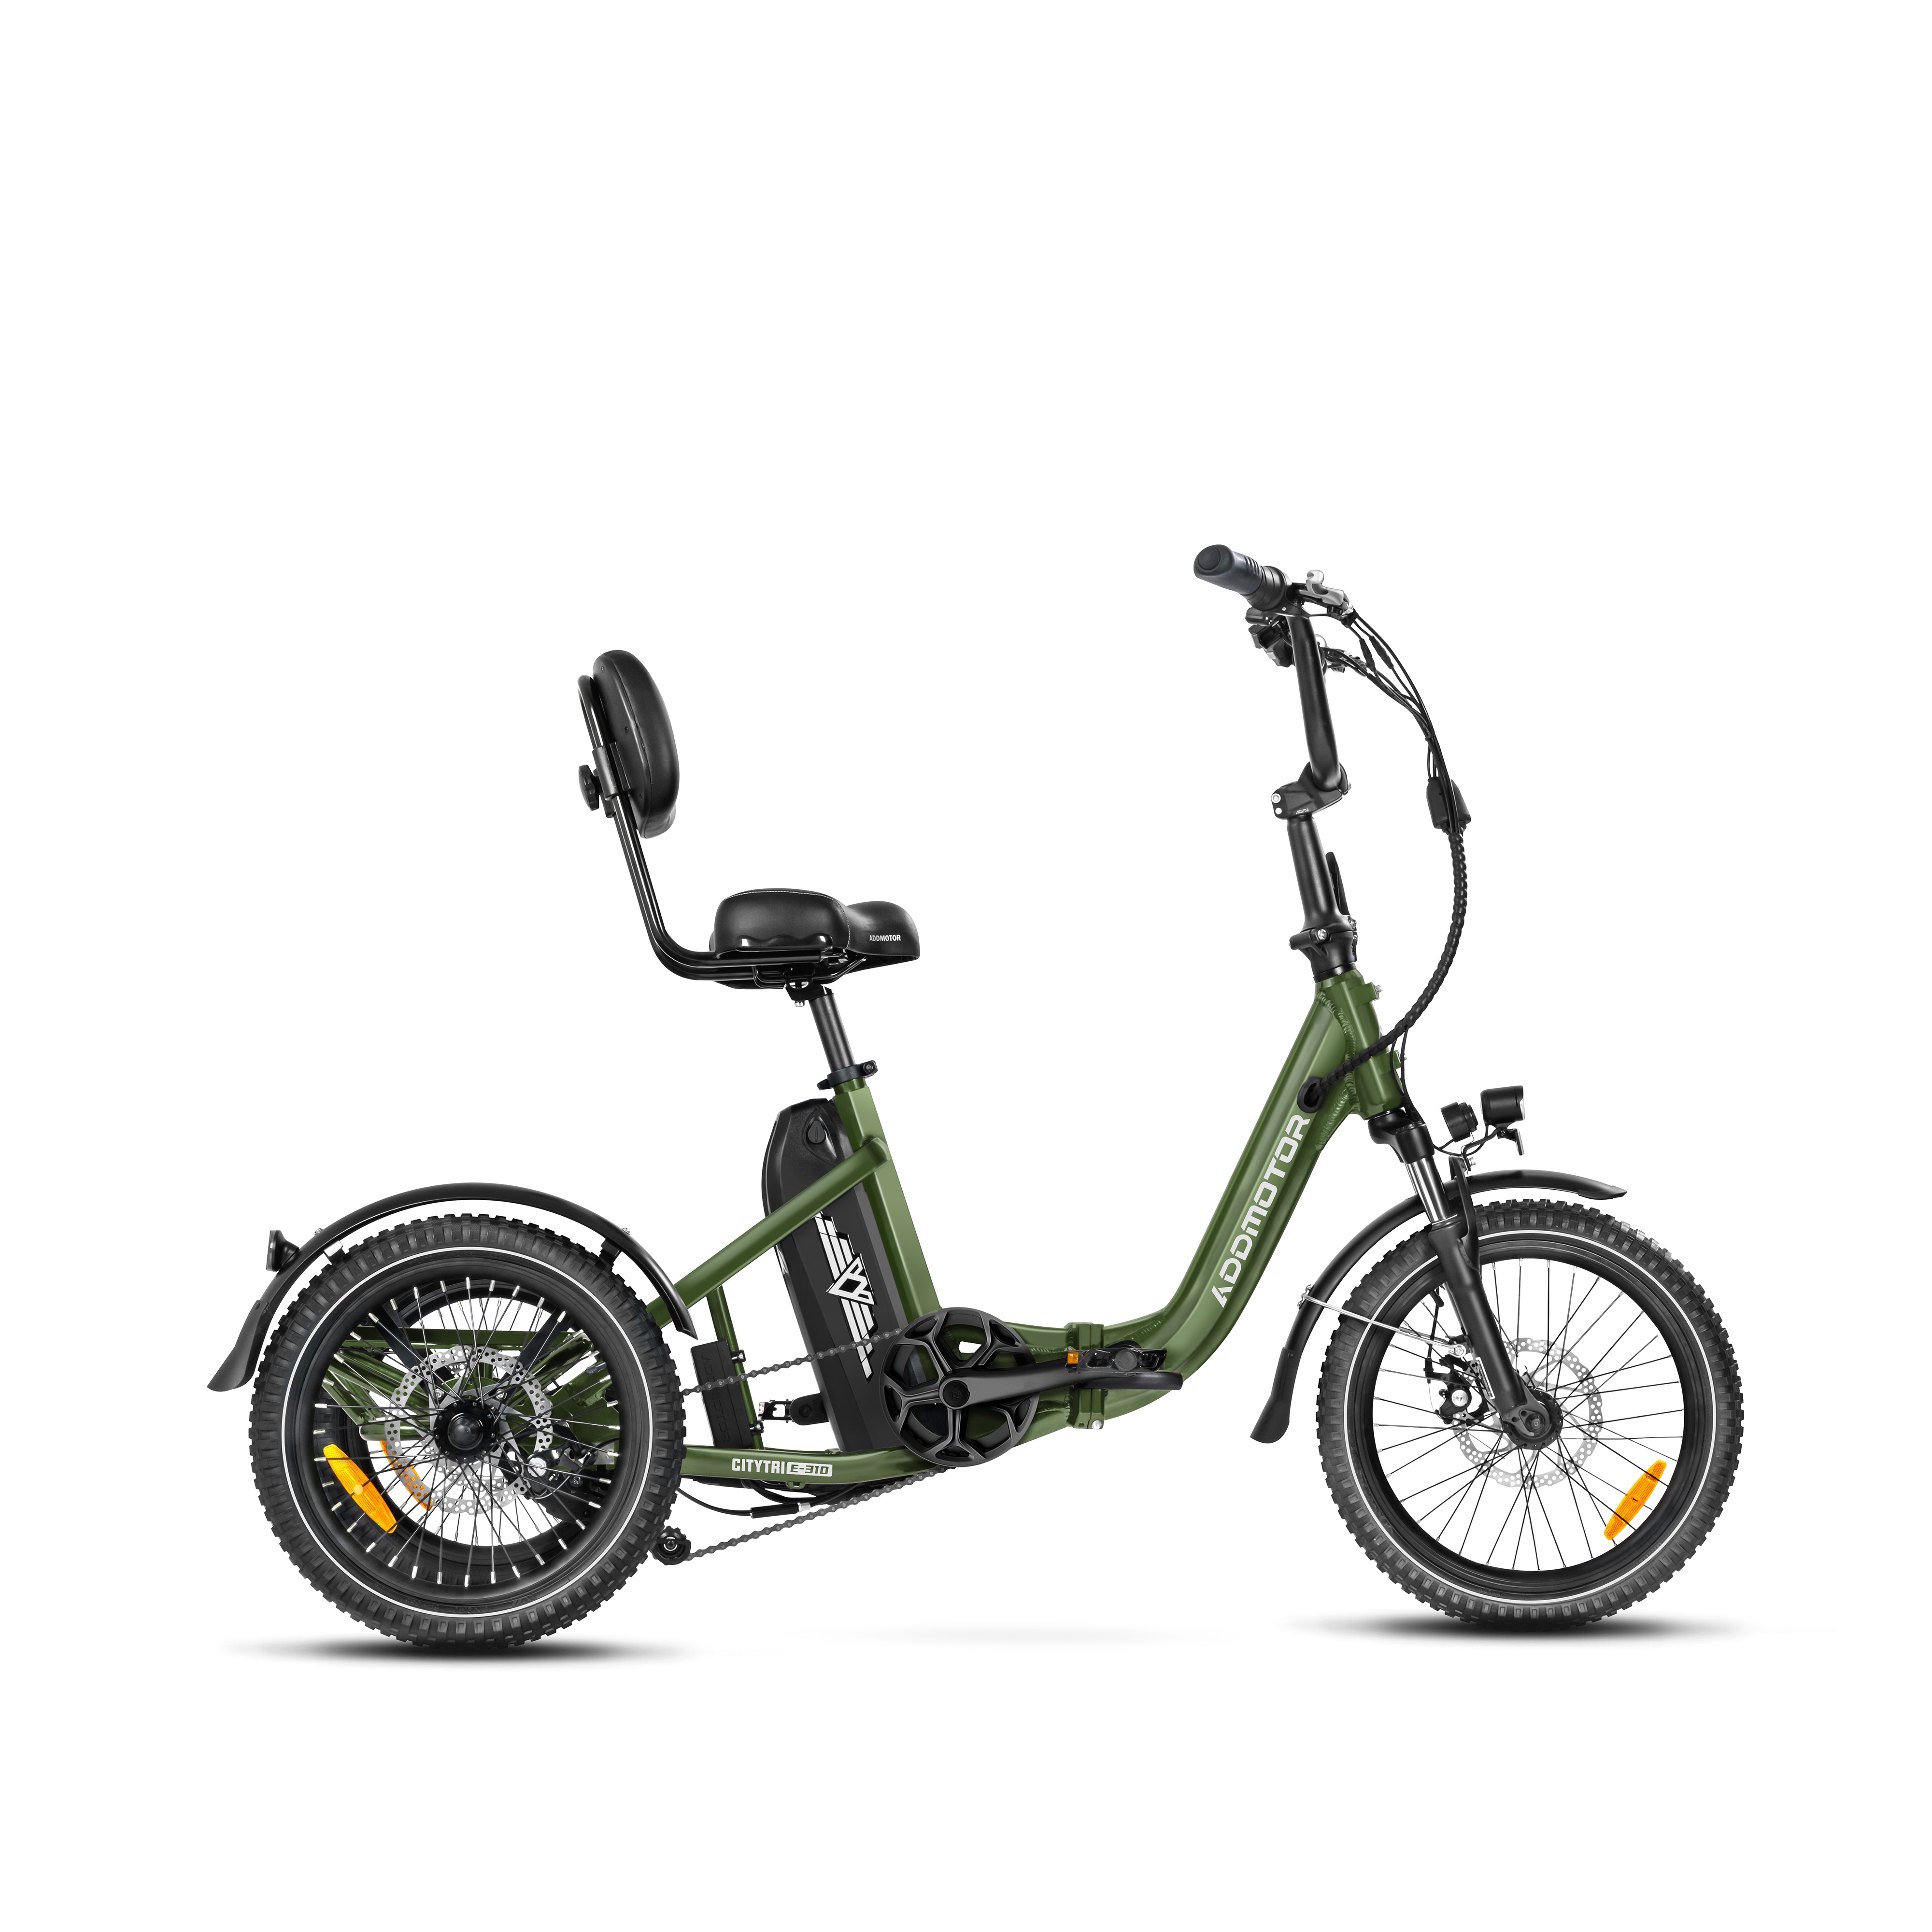 Addmotor Citytri E-310 Mini Electric Trike with 750W 20Ah Best Electric Tricycle Under $2000 Up To 90 Miles - Army Green